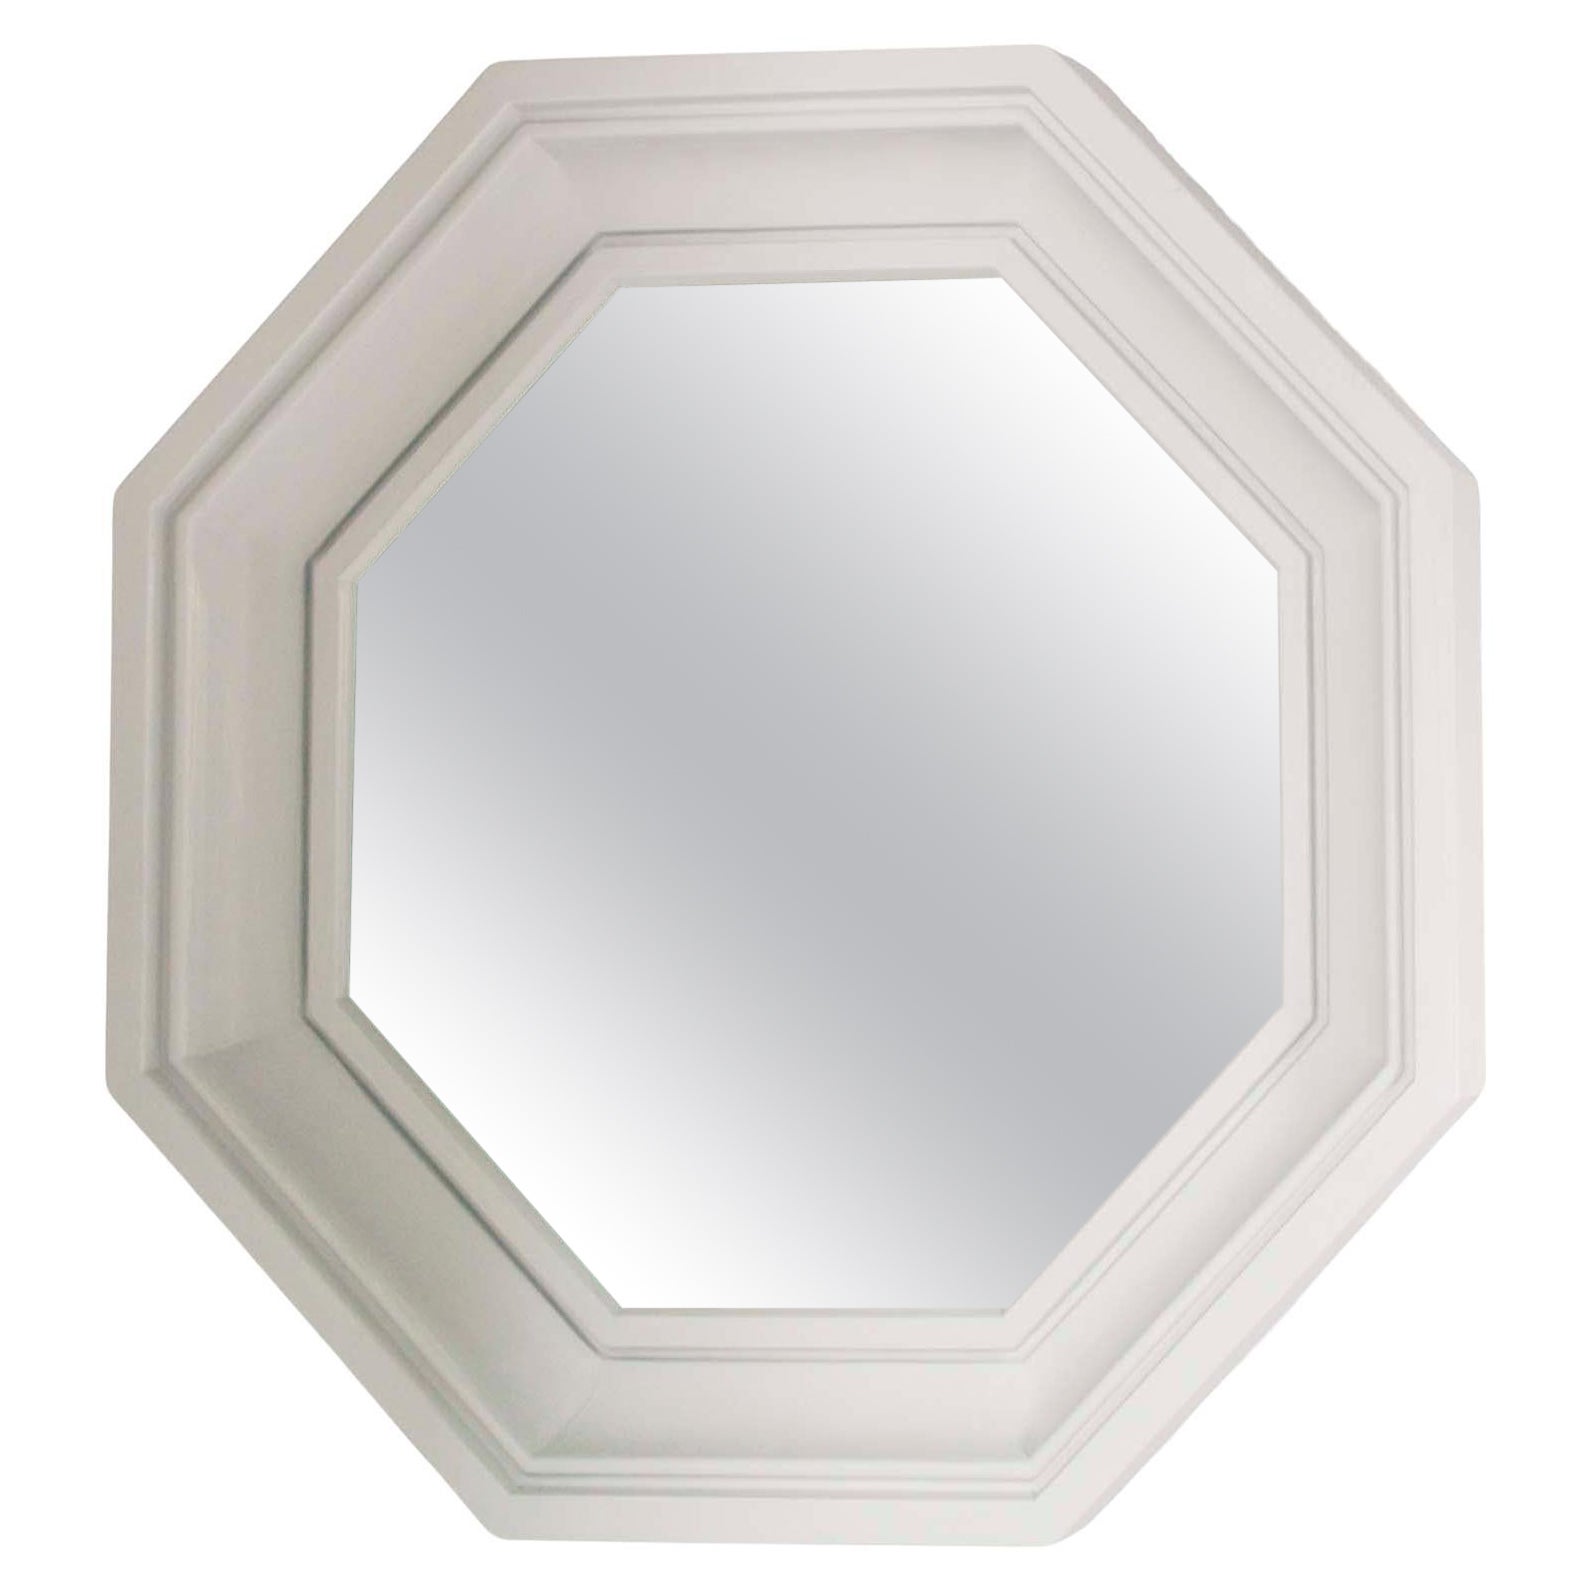 1970s Octagonal Wall Mirror in White Painted Walnut by Bottega Gadda Milano For Sale